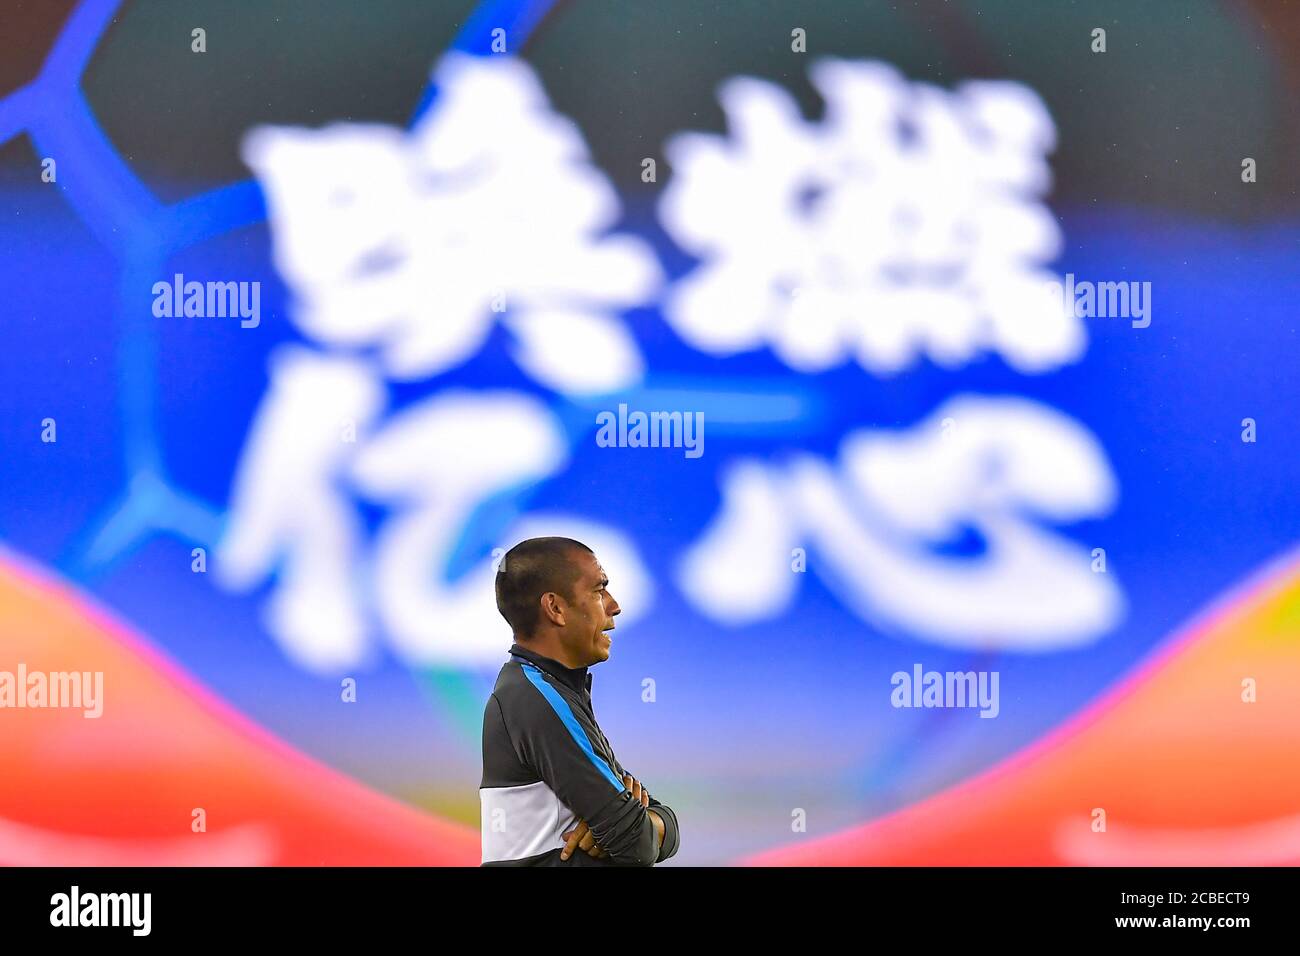 The manager of Guangzhou R&F Giovanni van Bronckhorst watches the third-round match of 2020 Chinese Super League (CSL) against Henan Jianye F.C., Dalian city, northeast China's Liaoning province, 5 August 2020. Henan Jianye F.C. and Guangzhou R&F F.C. drew the game with 1-1. Stock Photo